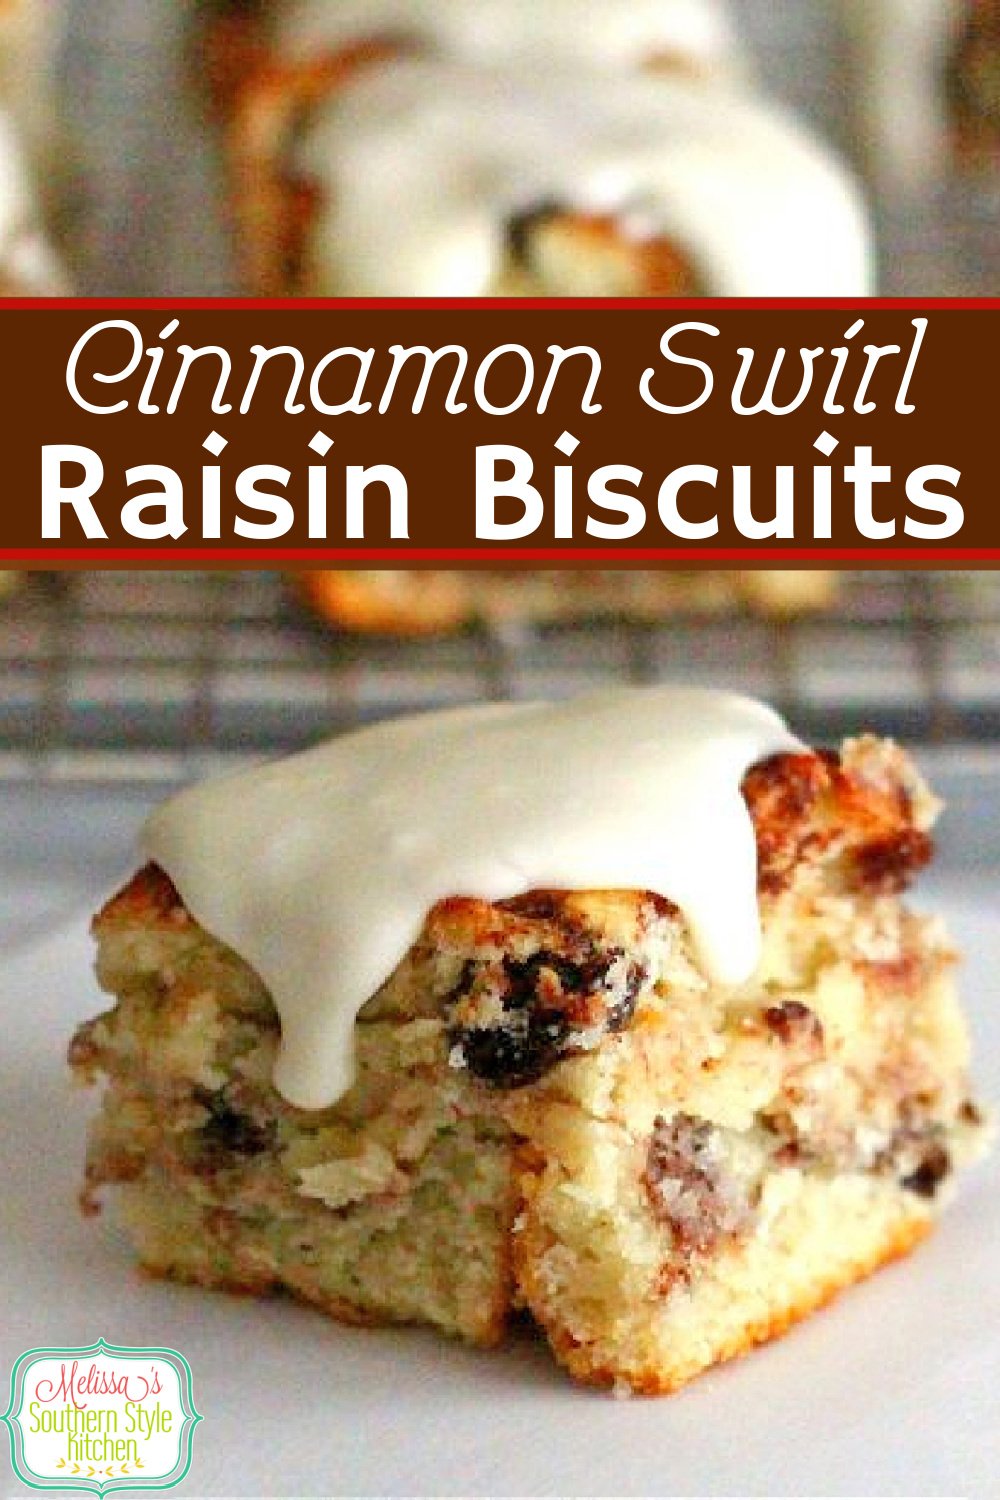 Start your morning with these Cinnamon Swirl Raisin Biscuits #cinnamonraisinbiscuits #raisinbiscuits #southernbiscuits #biscuitrecipes #raisins #brunch #breakfast #holidaybaking #cinnamonbiscuits #southernfood #southernrecipes via @melissasssk